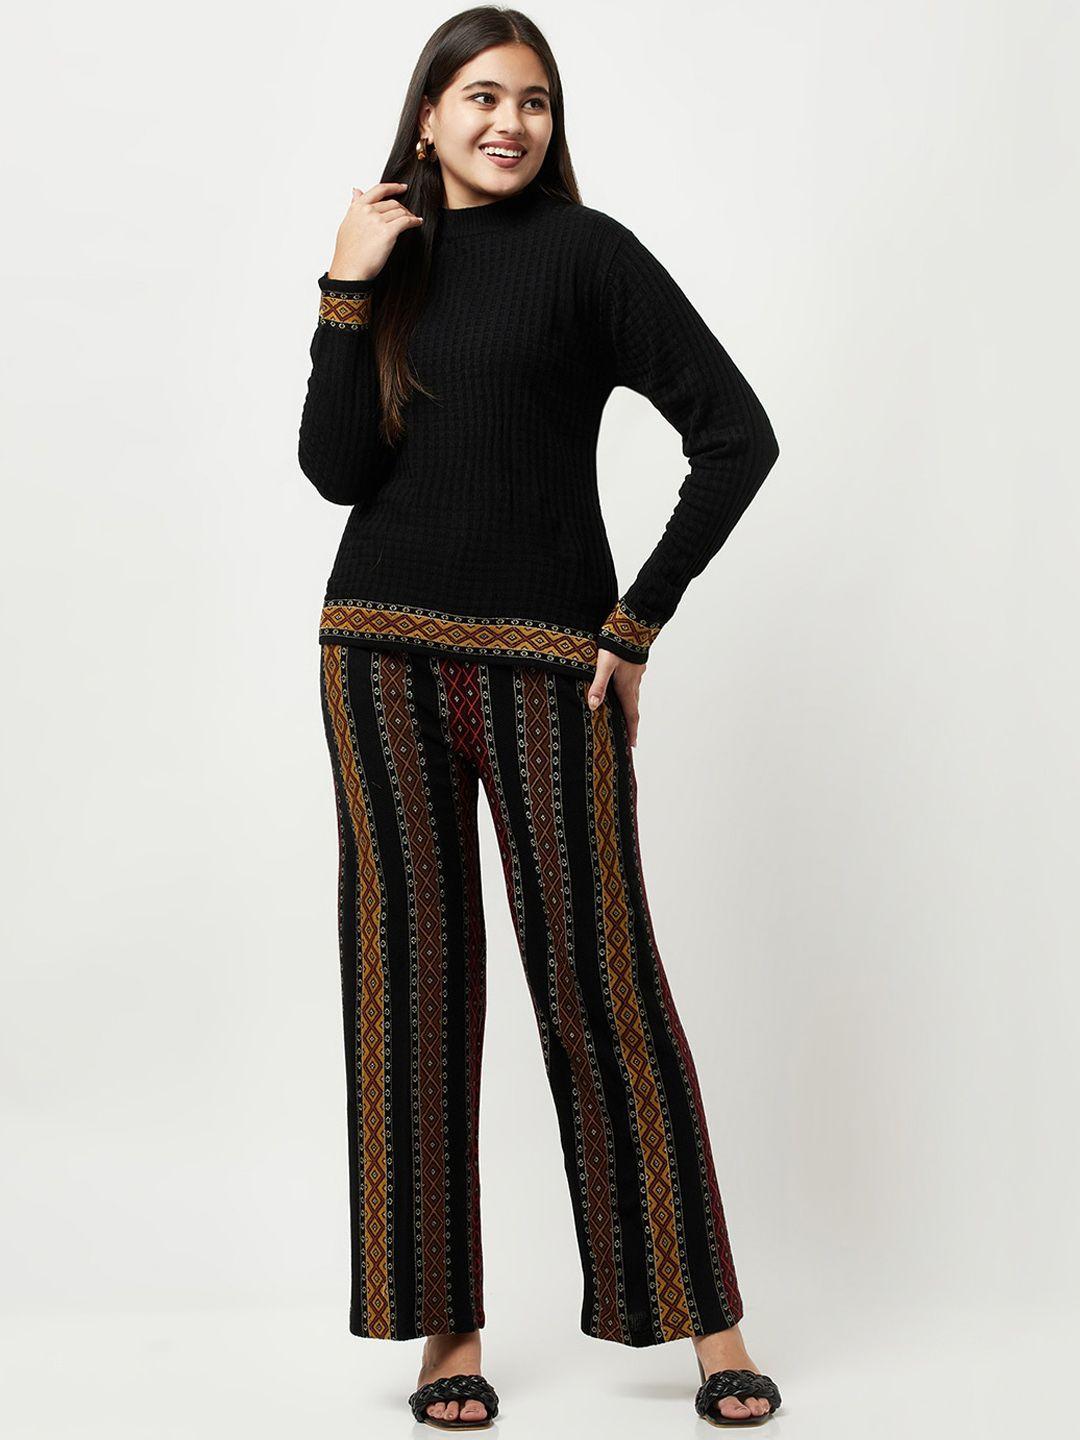 knitstudio self design knitted co-ord